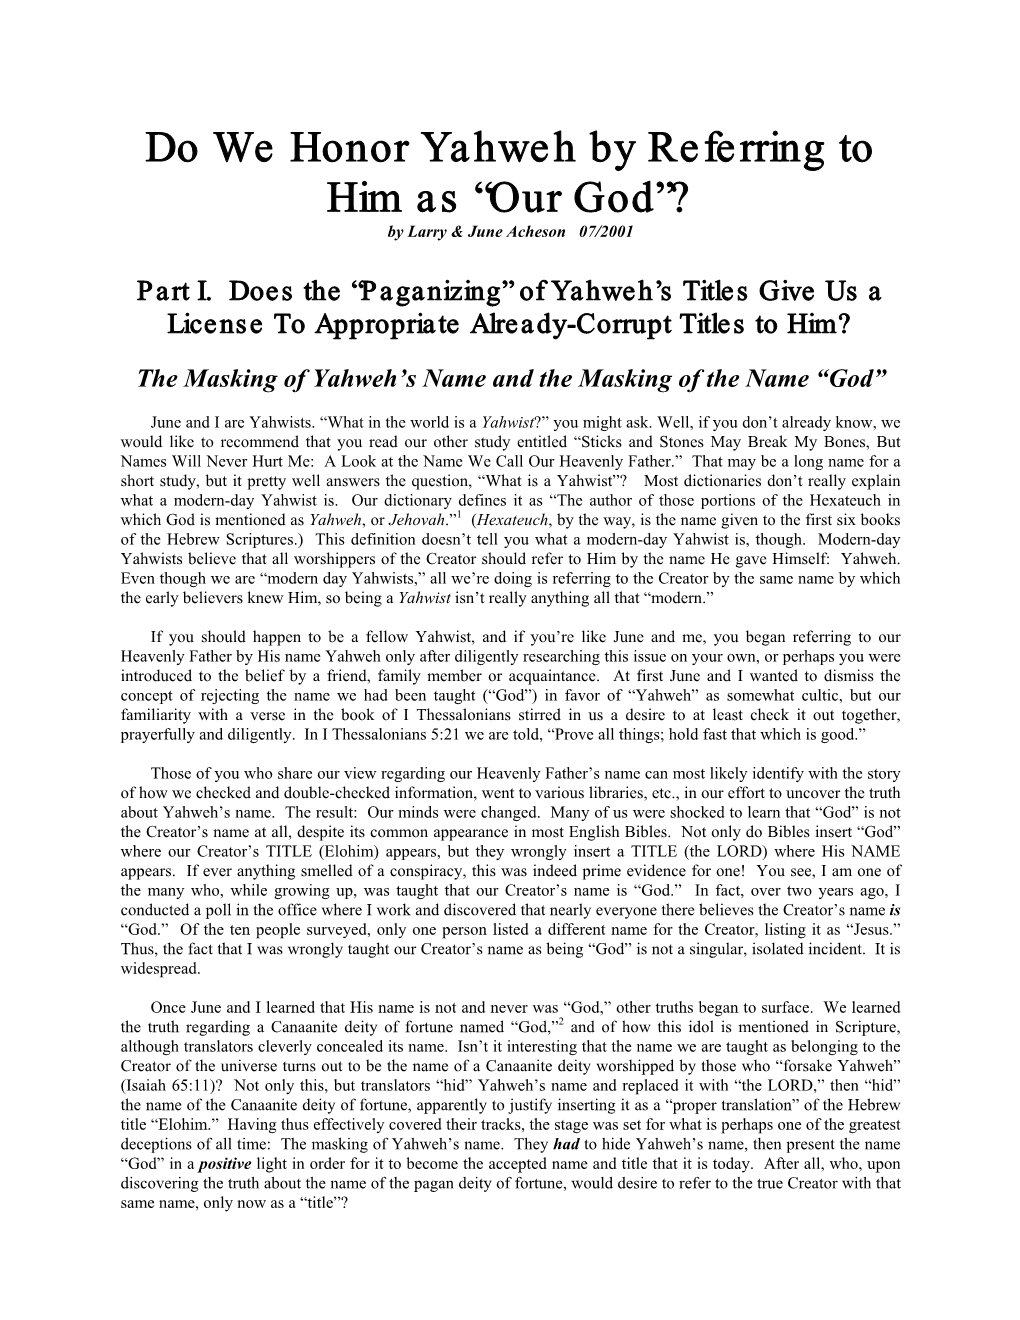 “Our God”? by Larry & June Acheson 07/2001